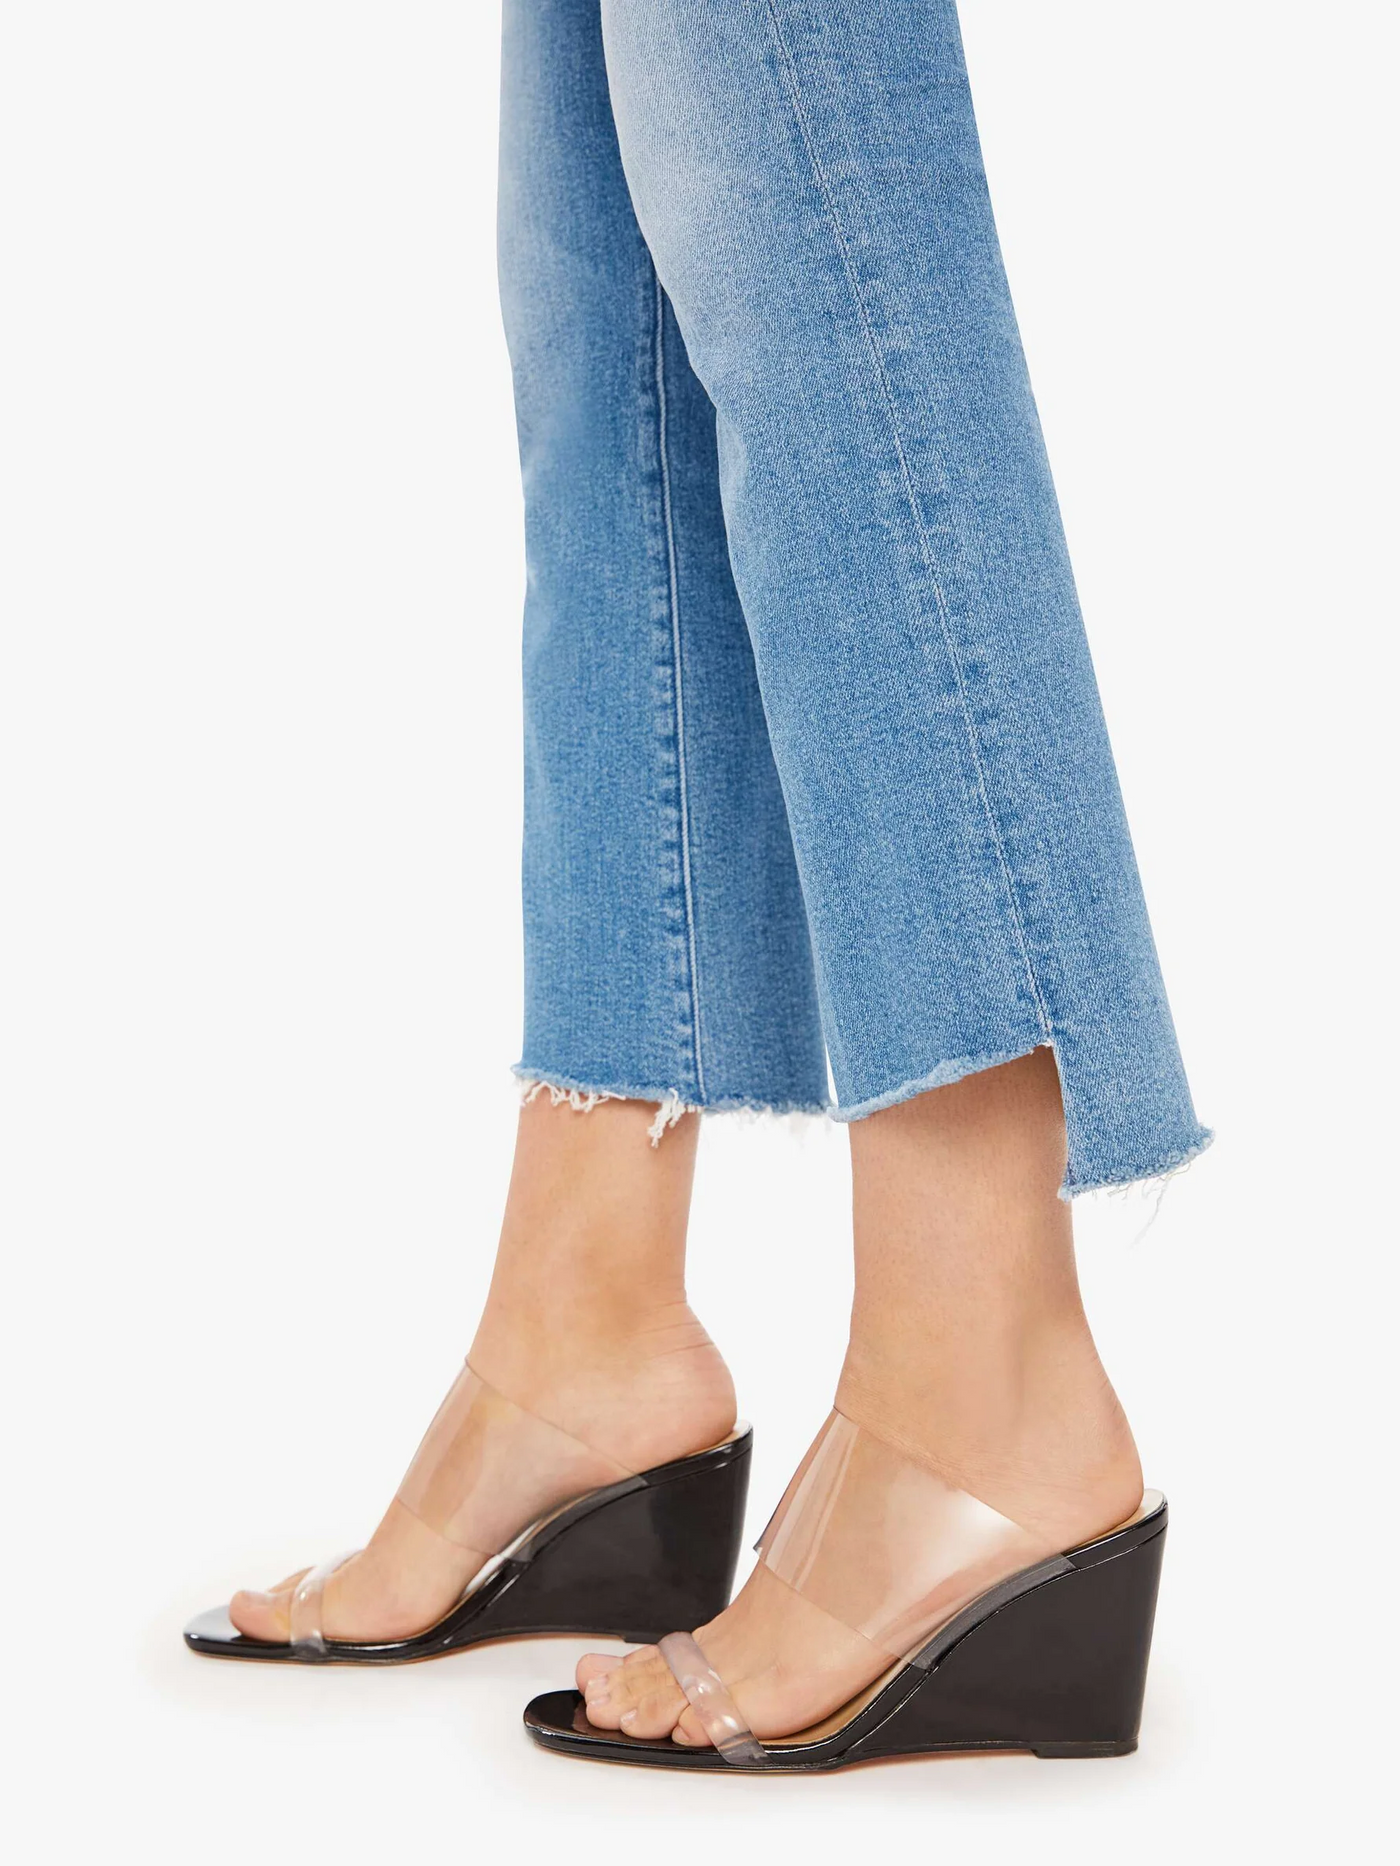 THE INSIDER CROP STEP FRAY IN OUT OF THE BLUE - Romi Boutique